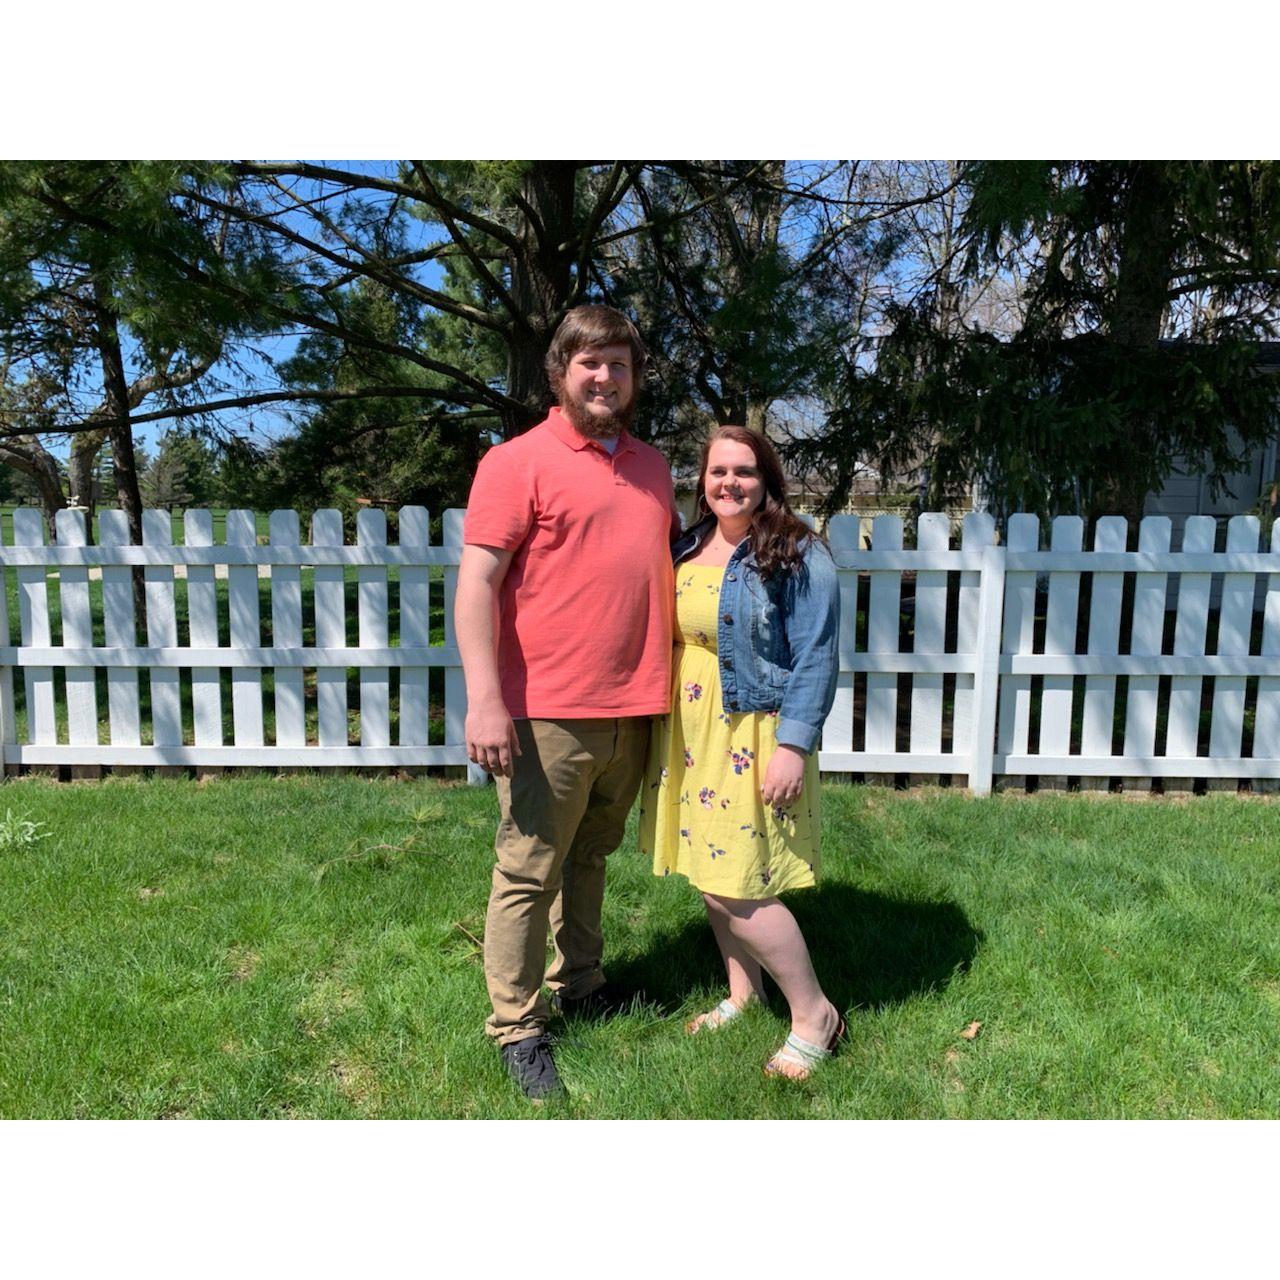 Our First Easter together!